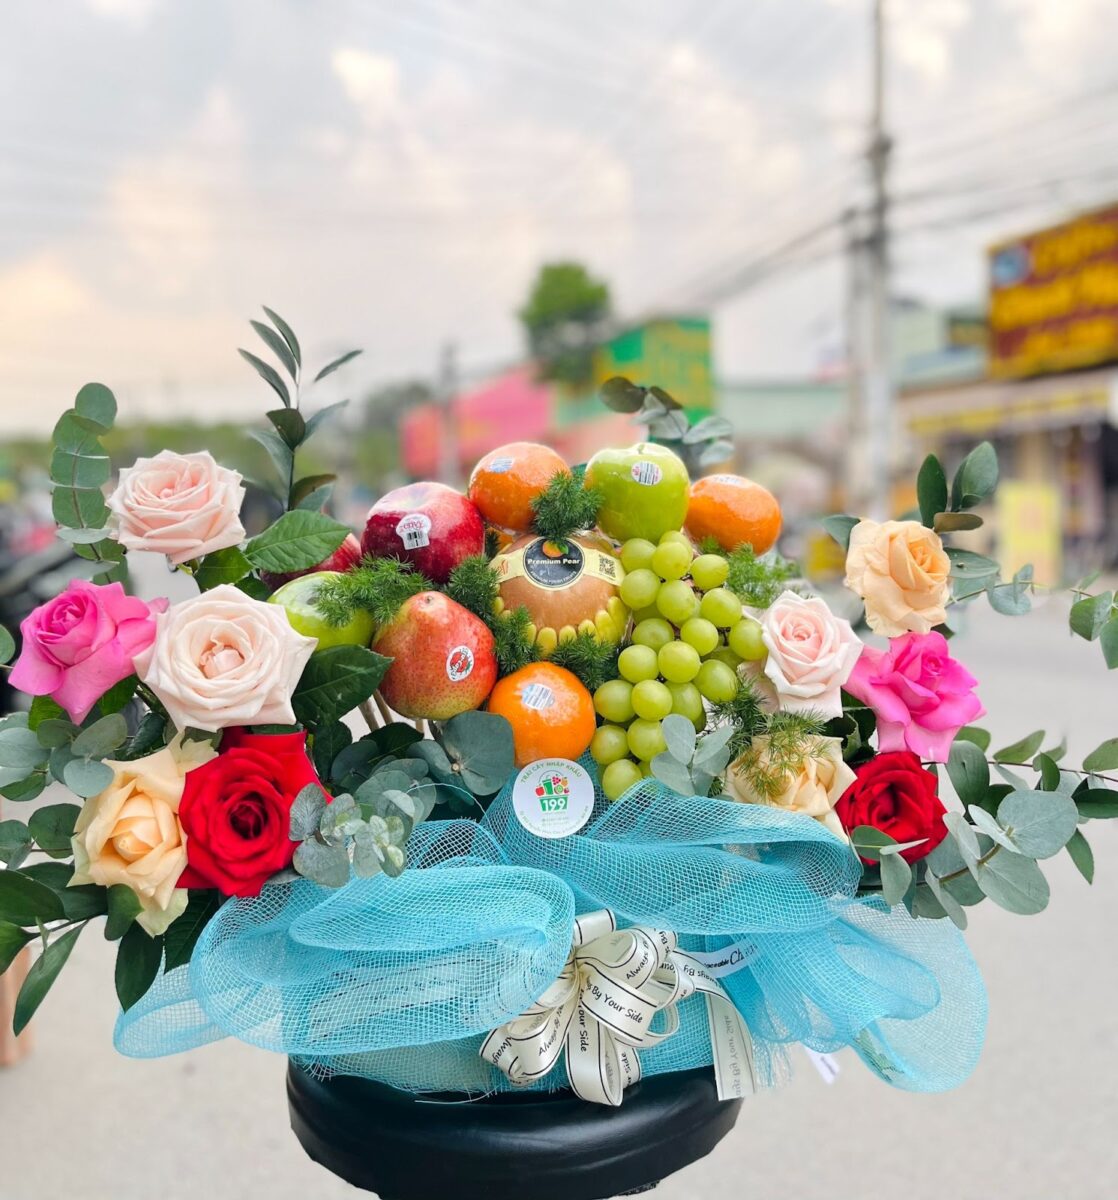 A gift basket using imported fruit and flowers from Da Lat, Vietnam